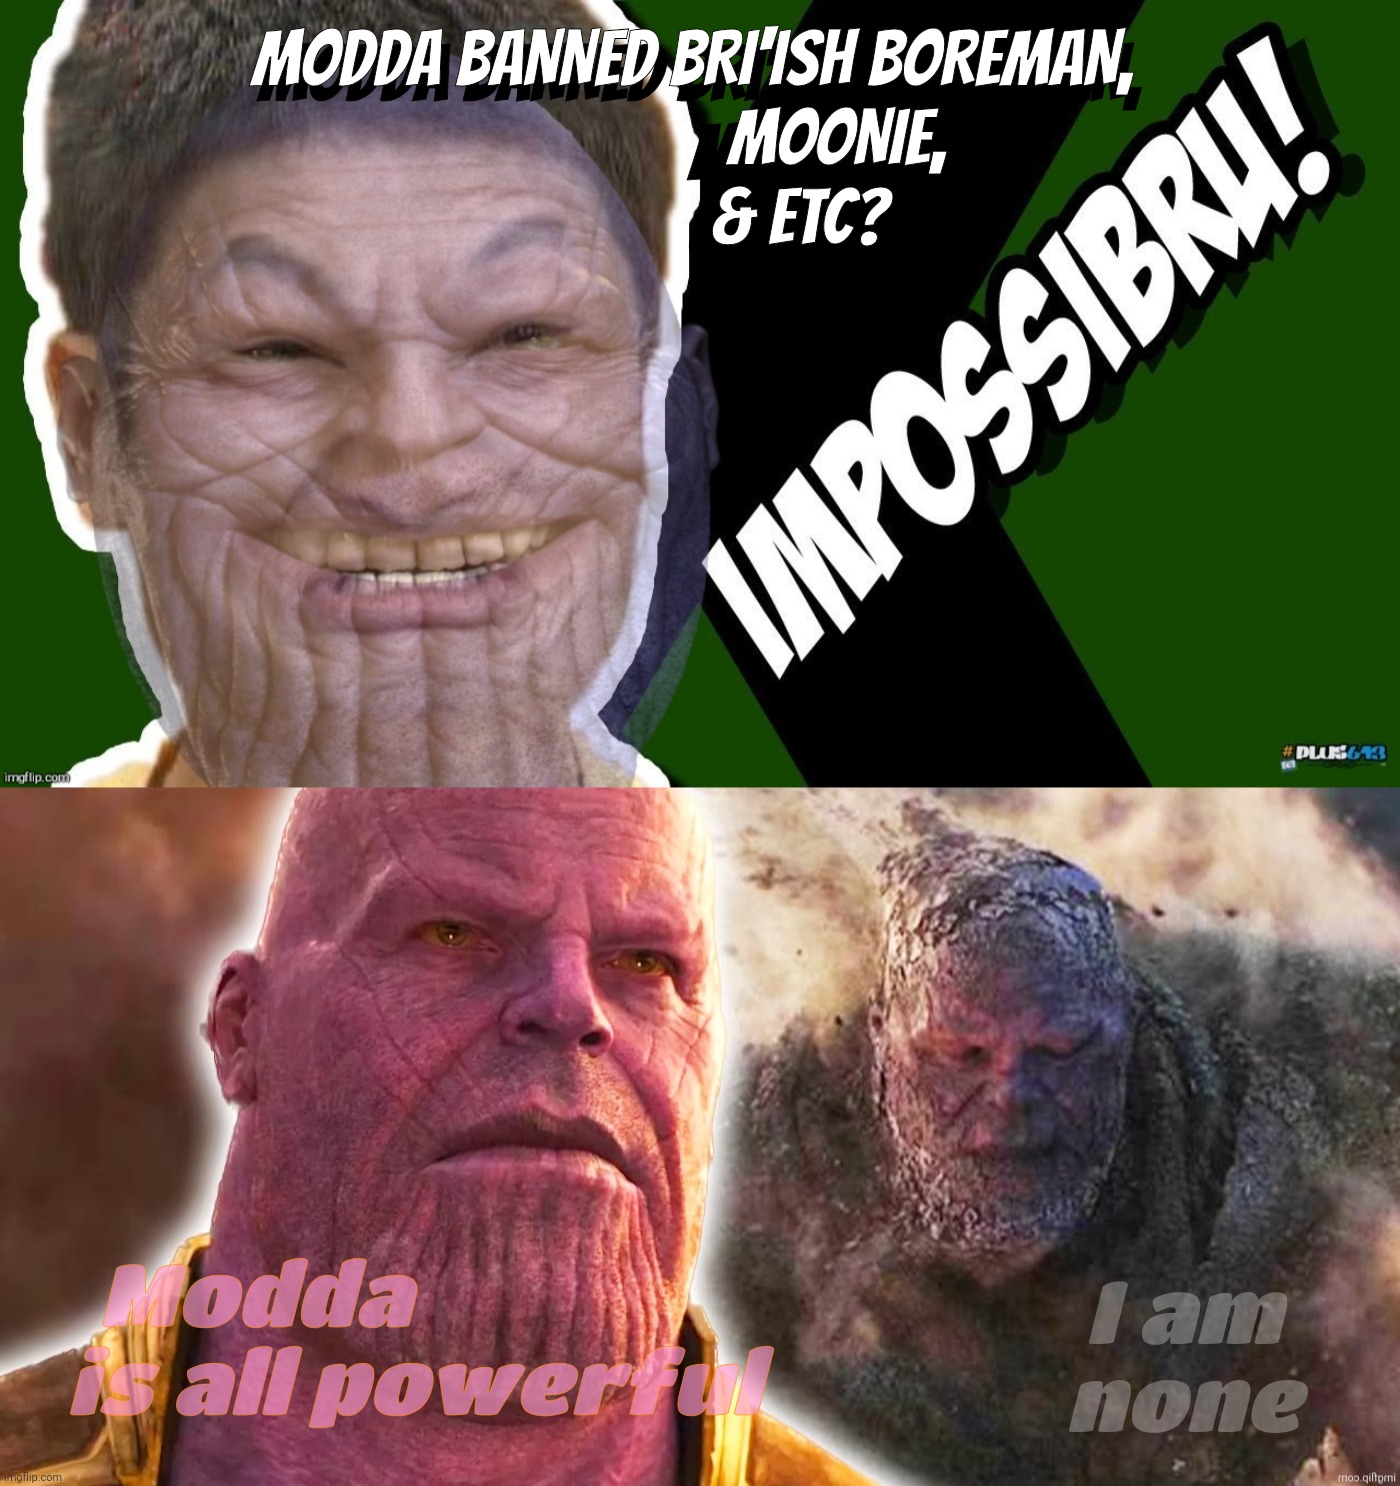 The hand of the Modda is a destroyer of worlds, as so memed: https://imgflip.com/i/7xc7rb | MODDA BANNED BRI'ISH BOREMAN,
                   MOONIE,
              & ETC? MODDA BANNED BRI'ISH BOREMAN,
             MOONIE,
          & ETC? I am
none; Modda                
is all powerful | image tagged in impossibru,impossibru guy thanos,thanos,modda,modda is a meanypants,not even adderall can save you | made w/ Imgflip meme maker